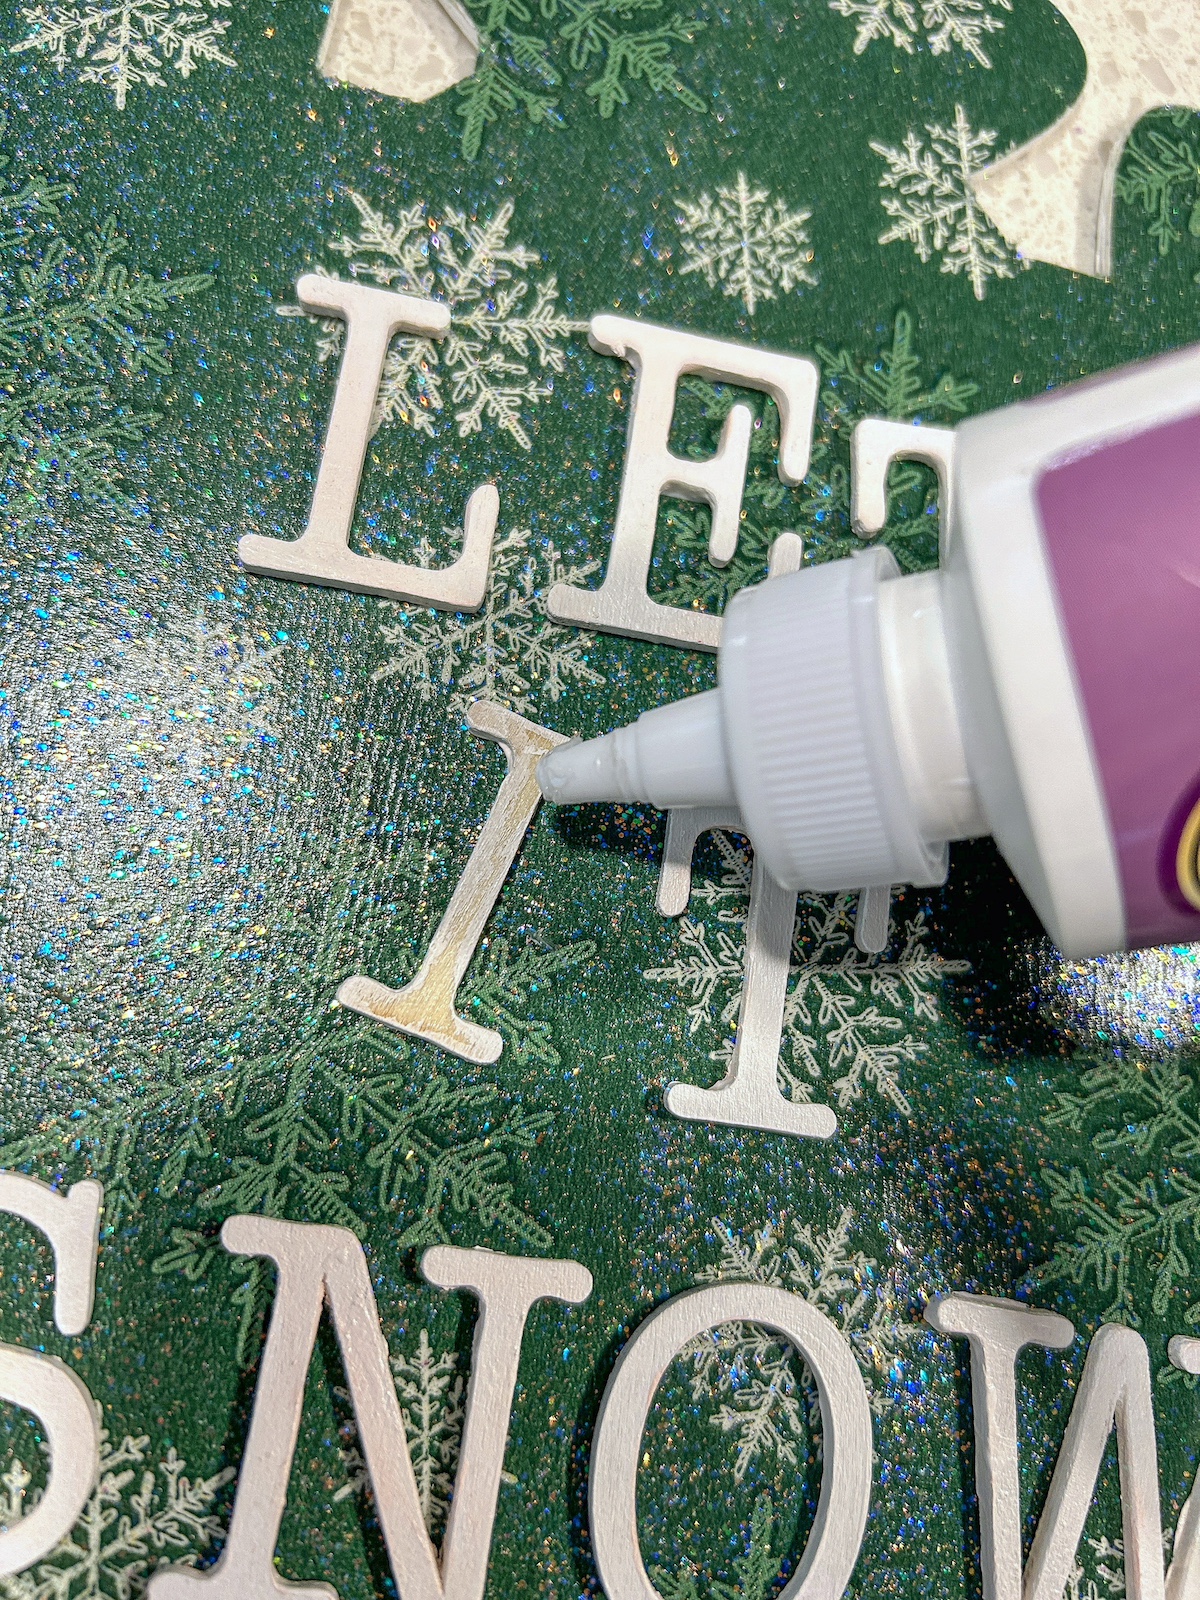 Gluing the let it snow wood letters down with craft glue